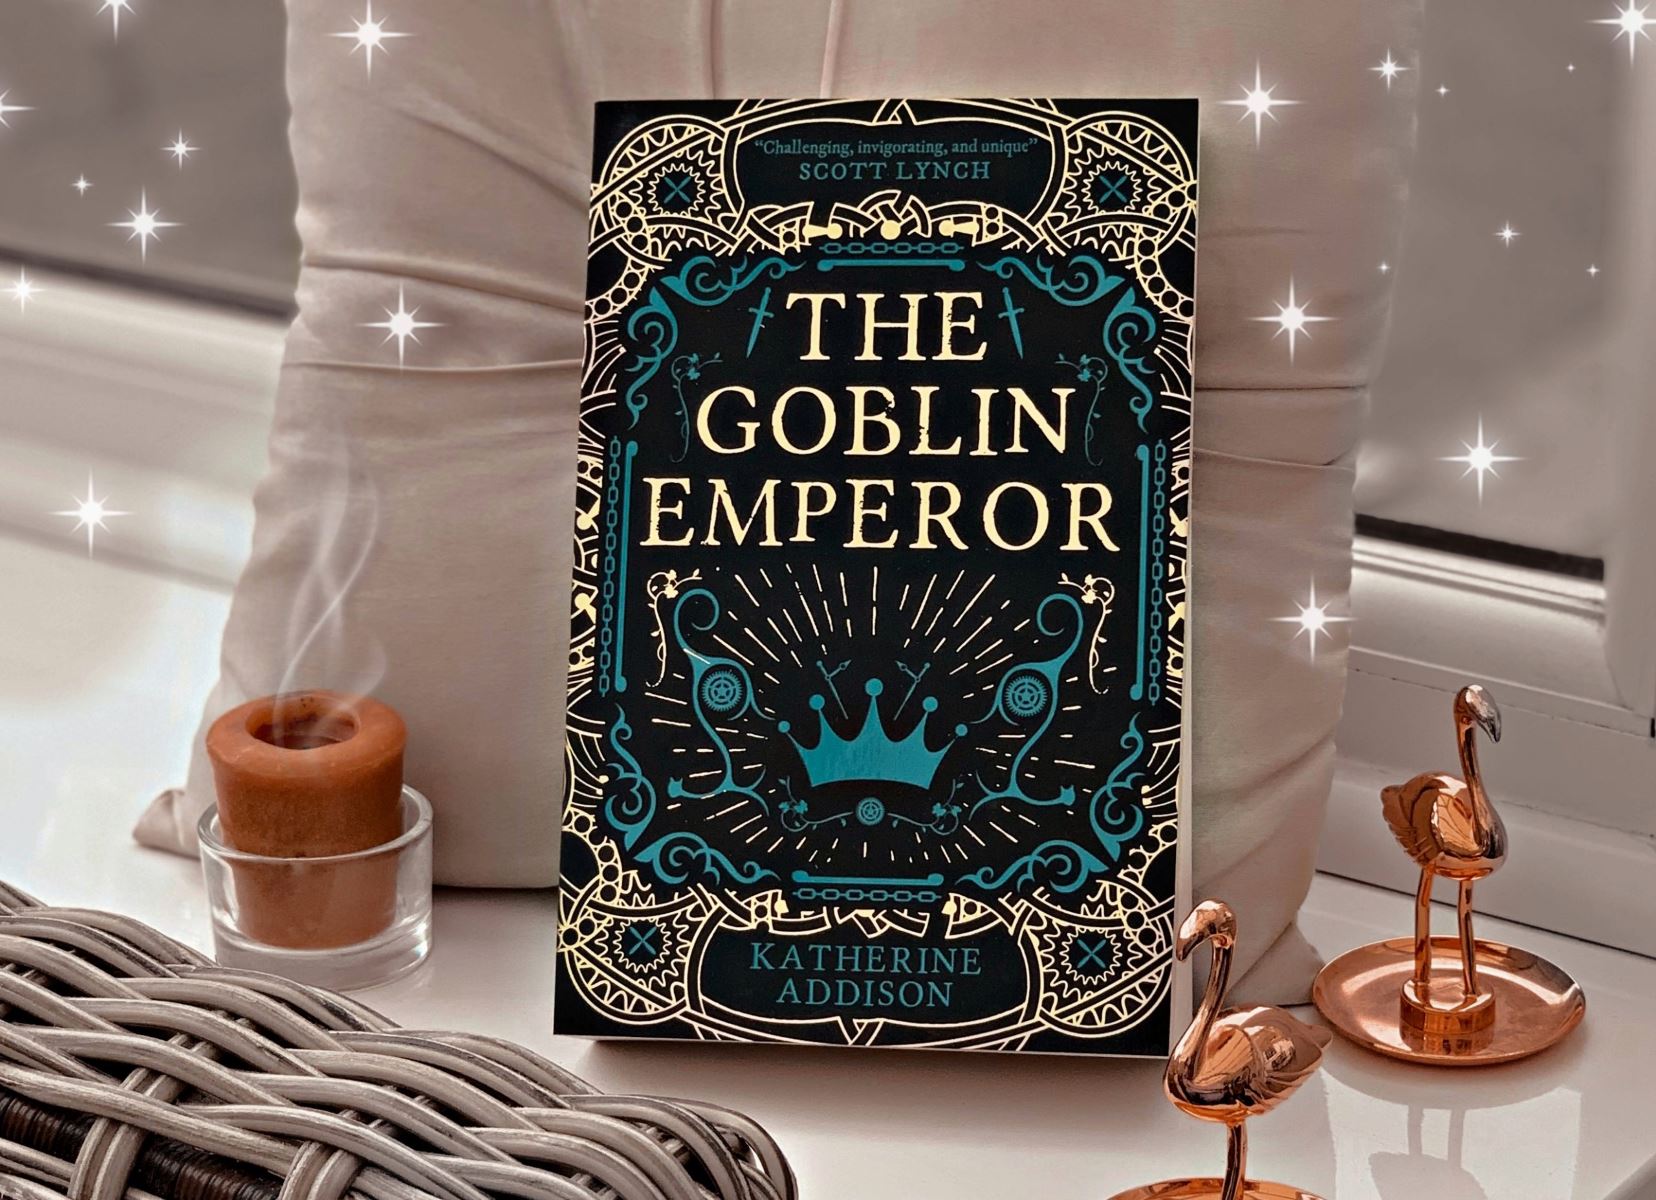 9-astonishing-facts-about-the-goblin-emperor-katherine-addison